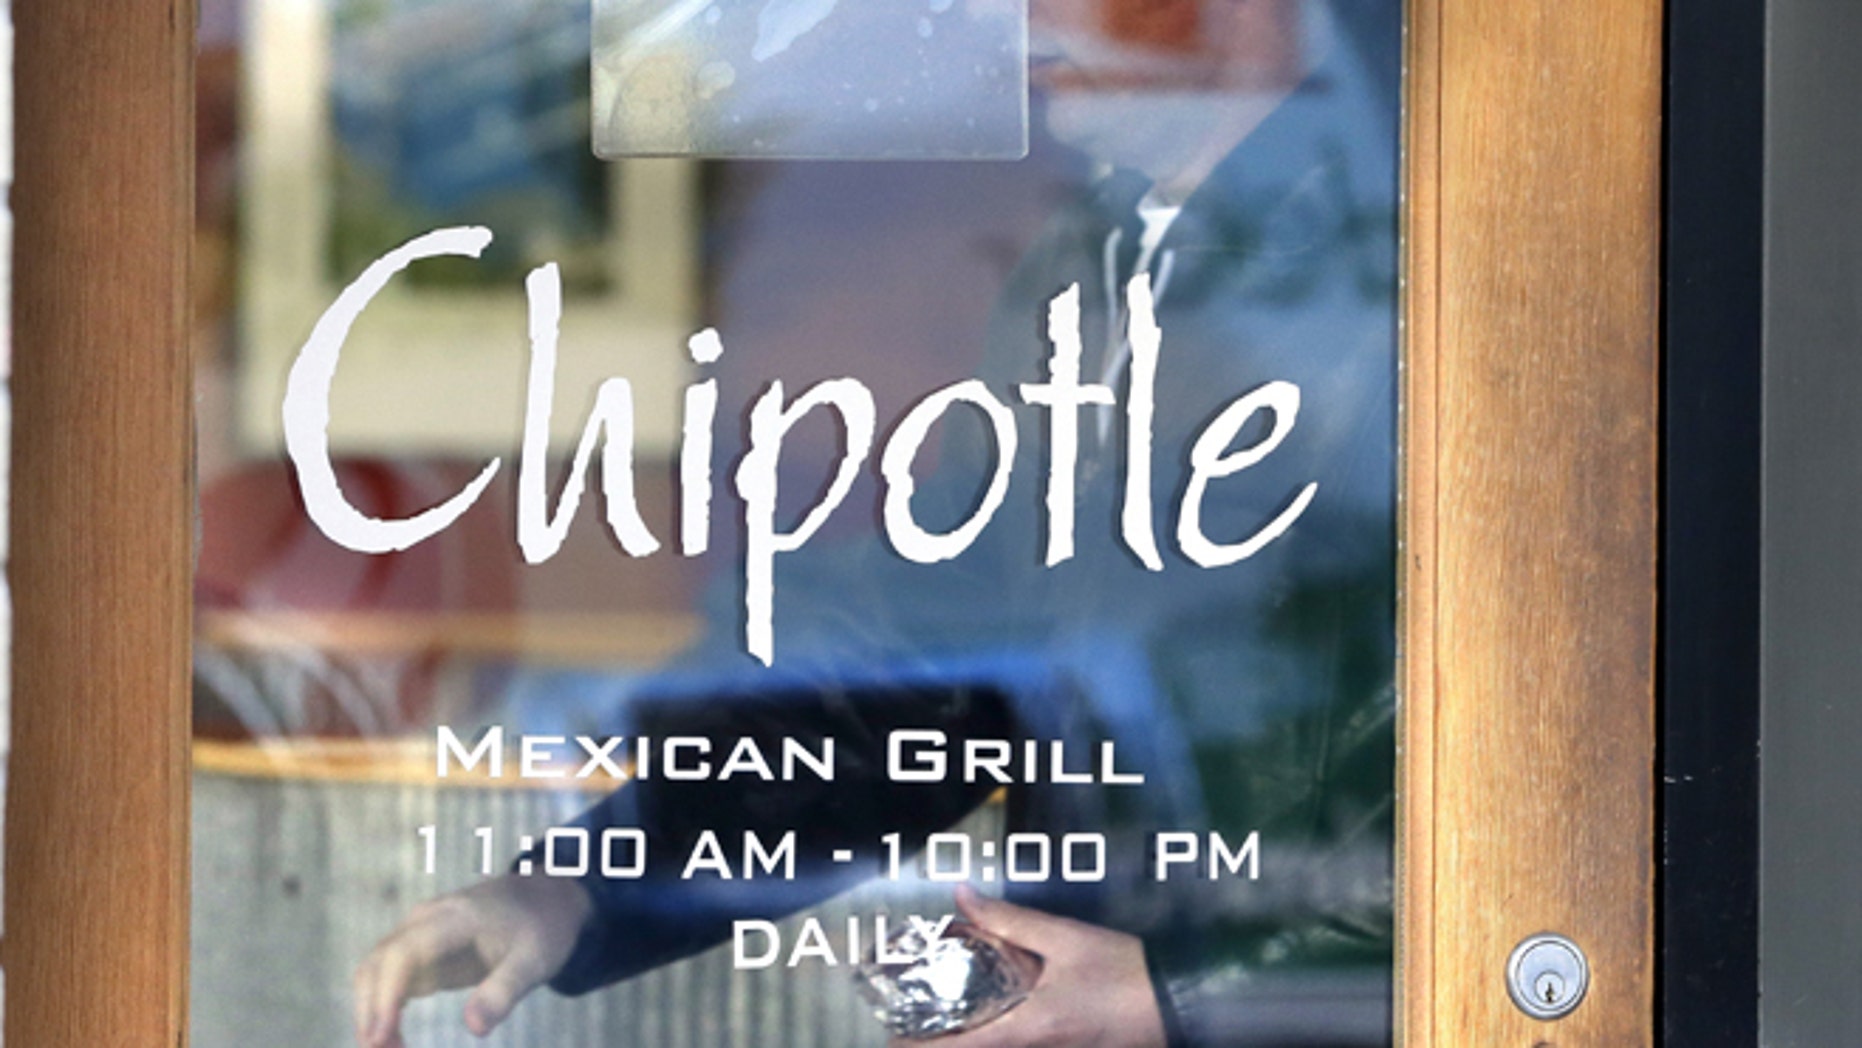 Chipotle fired a director who, according to the company, refused to serve a group of black clients.